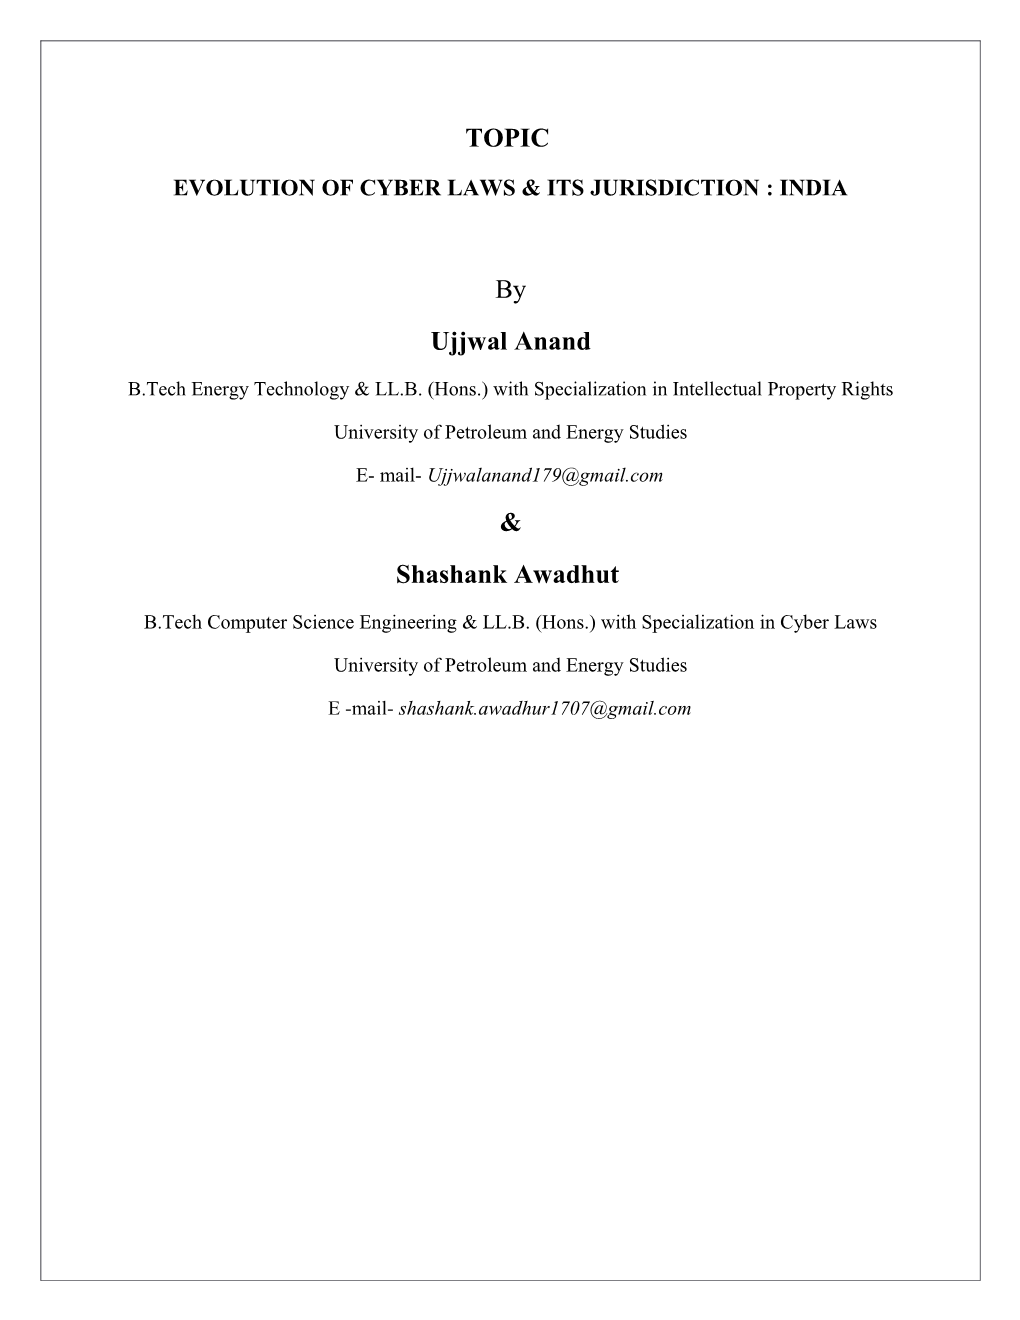 Evolution of Cyber Laws & Its Jurisdiction : India